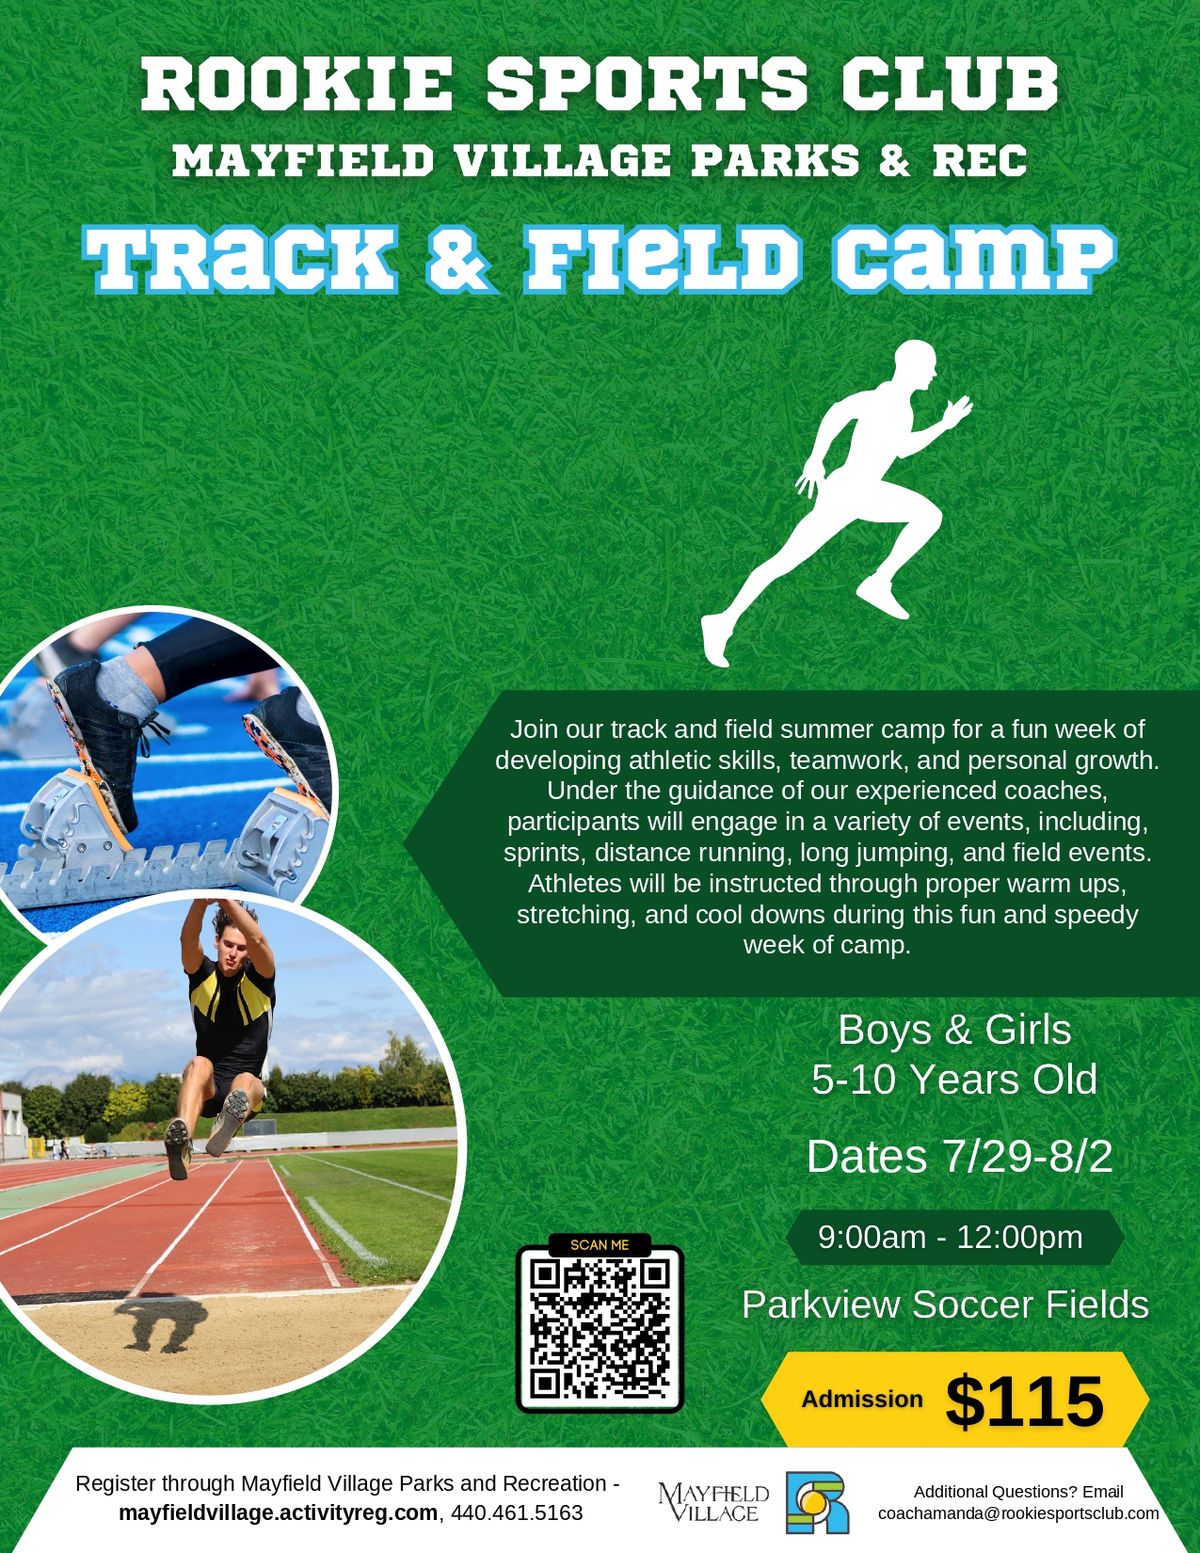 ROOKIE SPORTS CLUB SUMMER CAMPS - TRACK & FIELD CAMP (Ages 5-10)